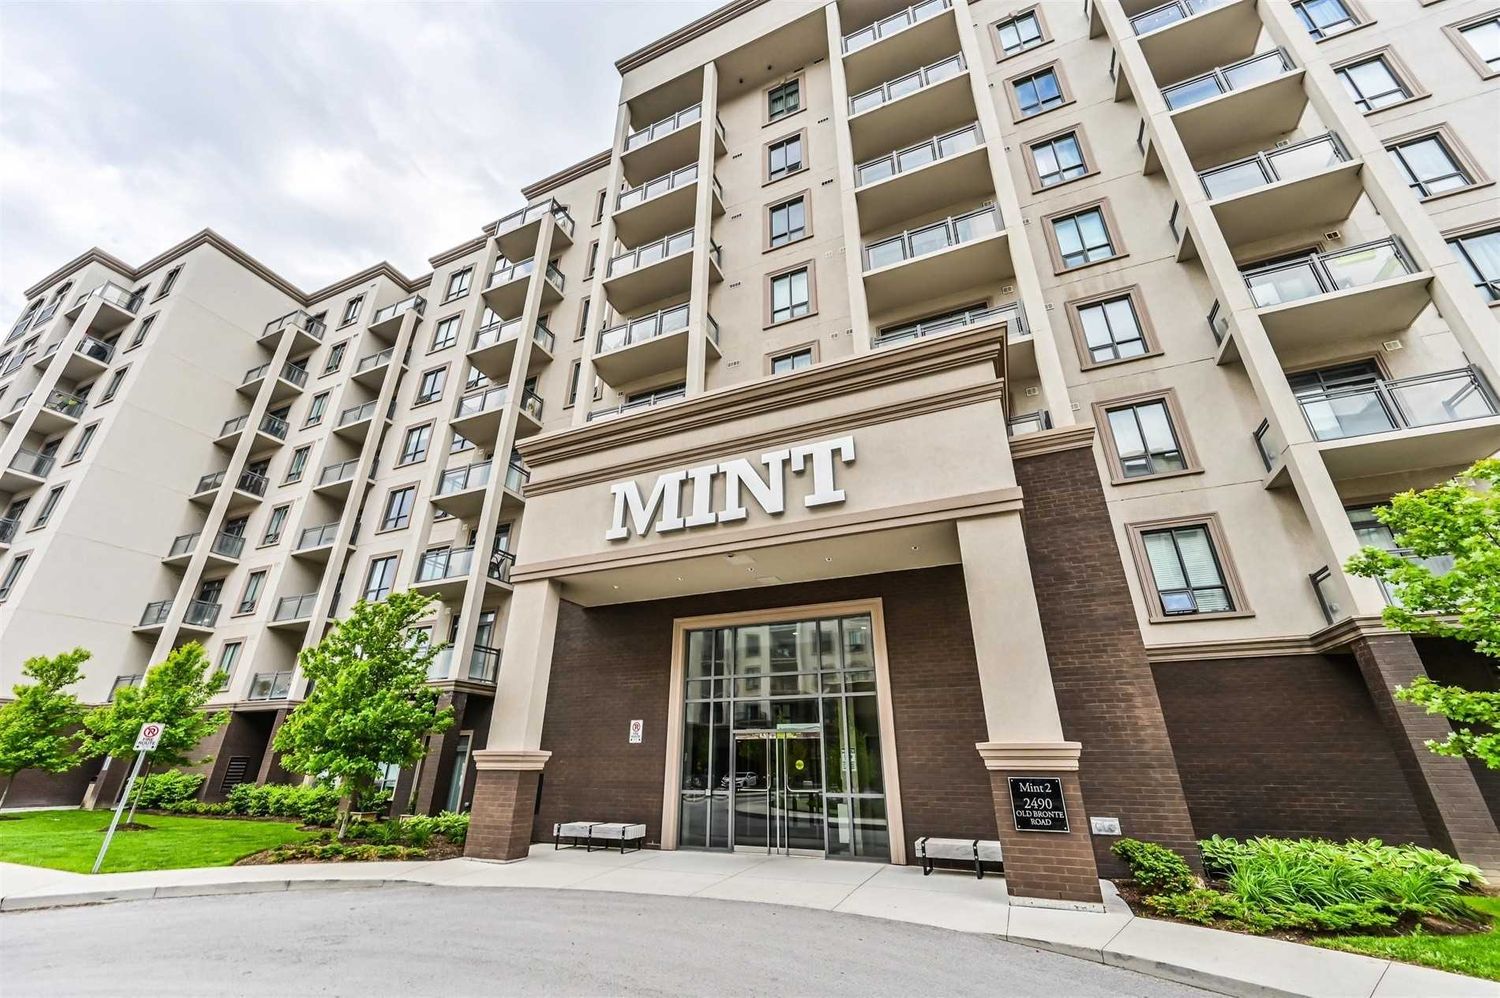 2490 Old Bronte Road. Mint Condos is located in  Oakville, Toronto - image #2 of 3